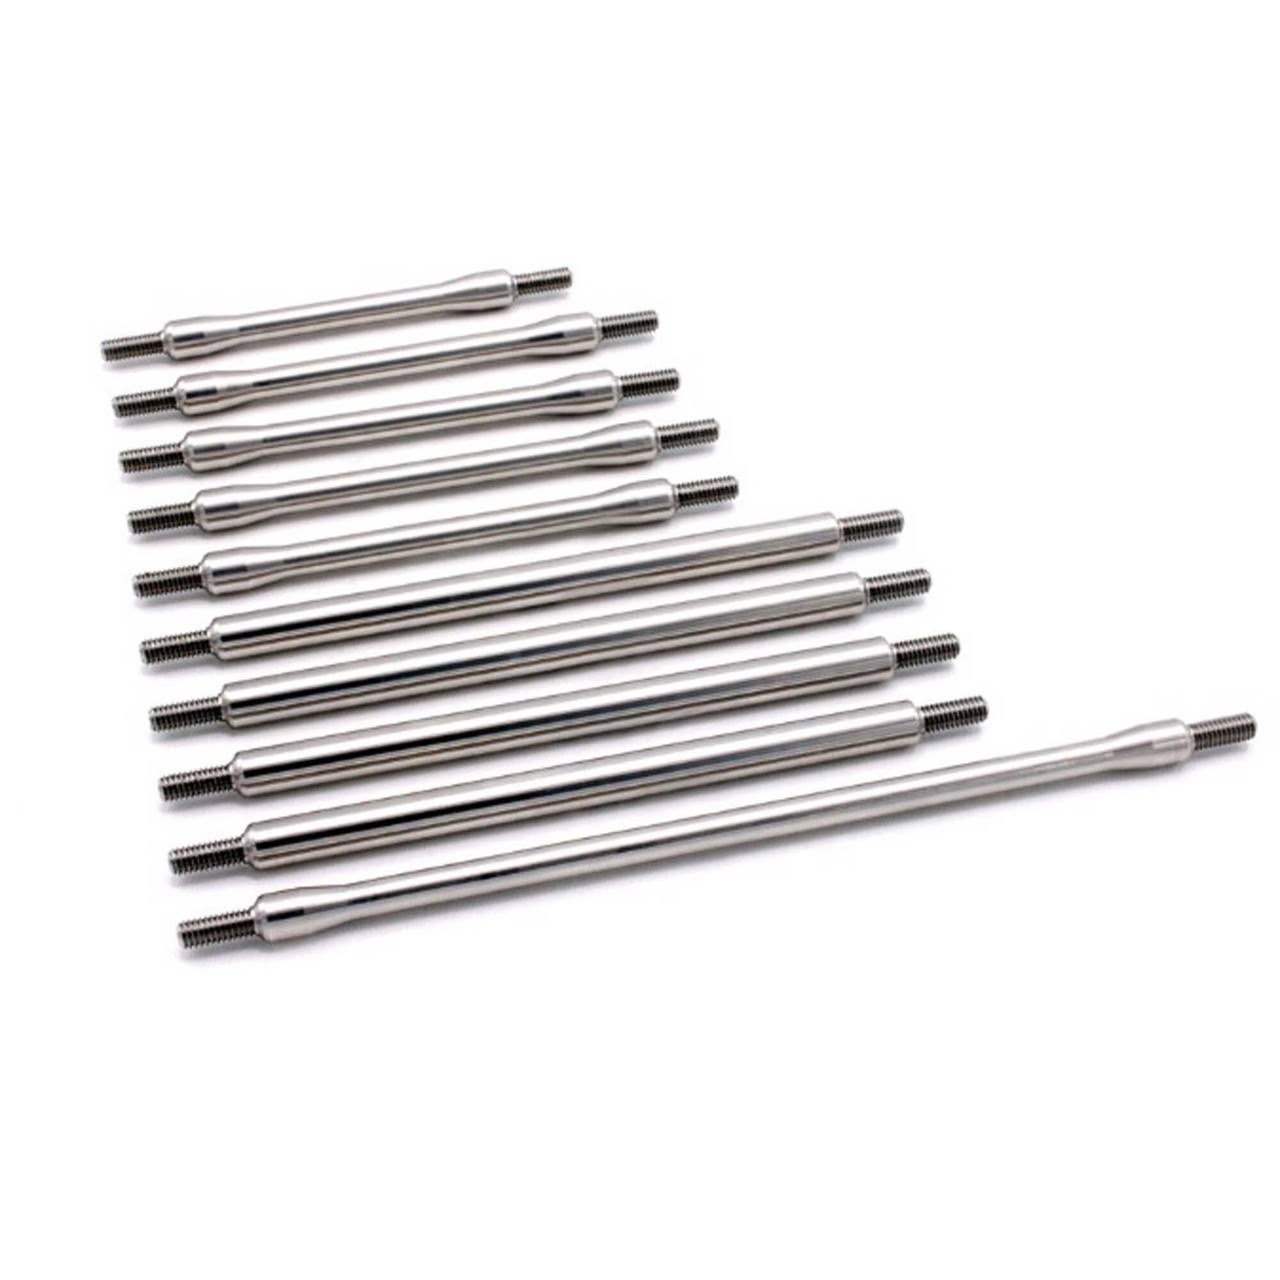 Vanquish Products Incision Irc00184 Capra Stainless Steel 10pc Link Kit